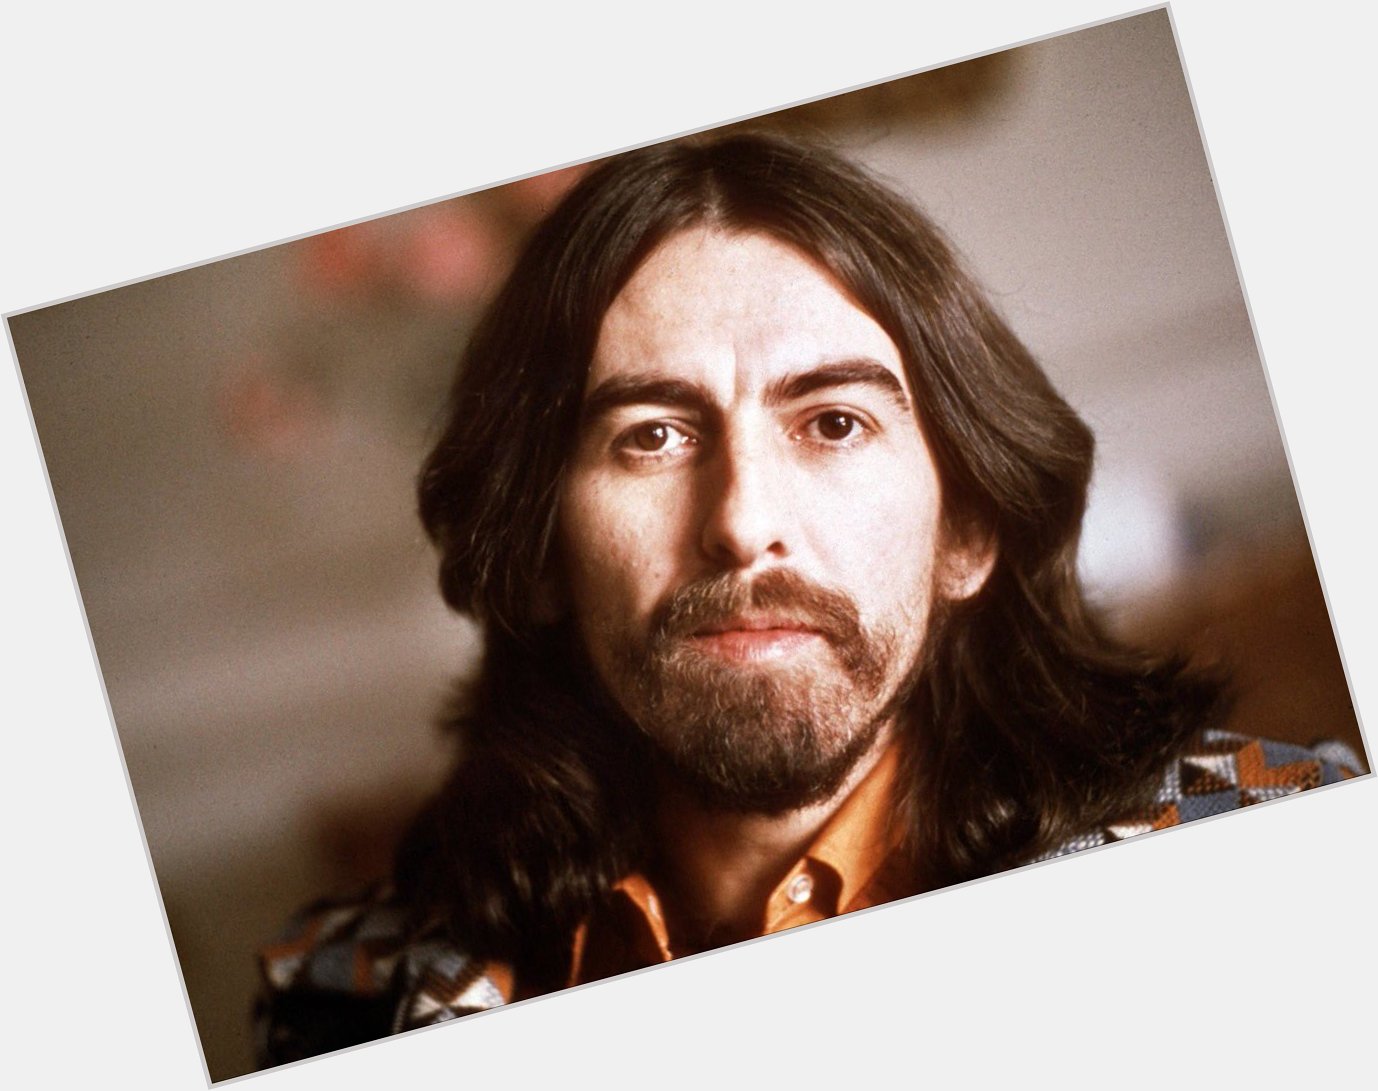 Happy Birthday to George Harrison who would have been 75 today. 
What are your favorite songs?  